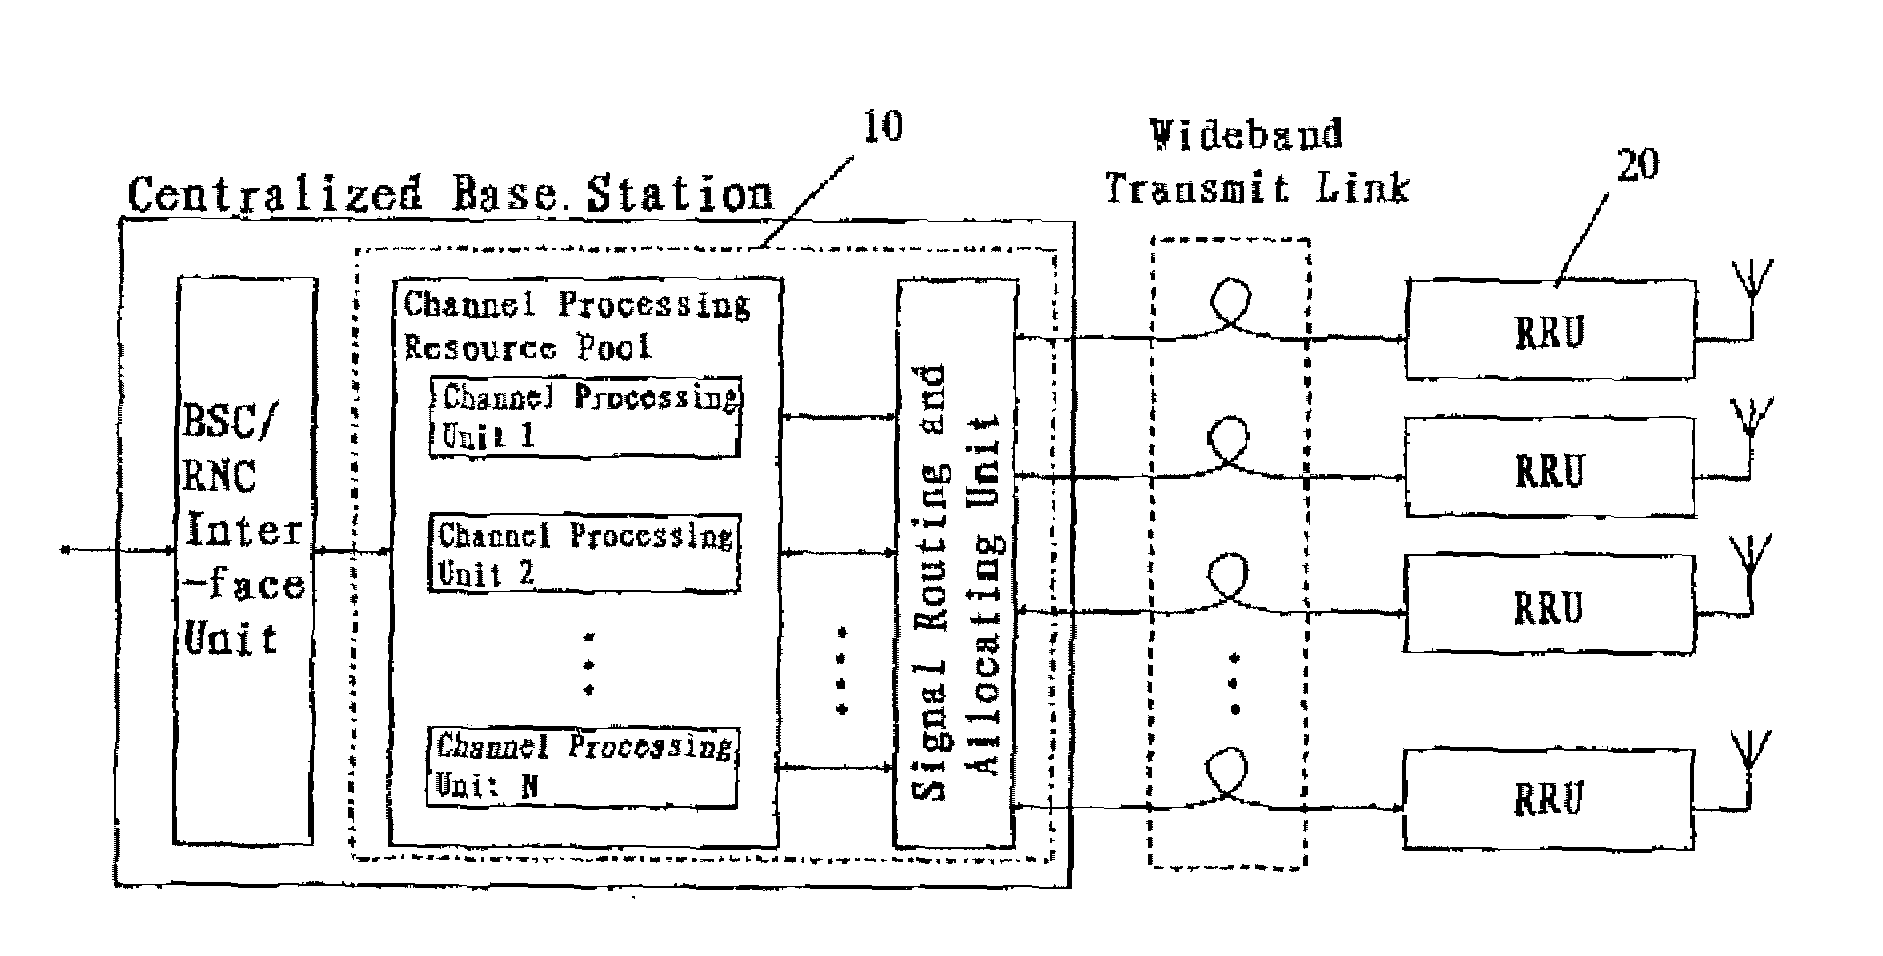 Method for Dynamic Resource Allocation in Centrailized Base Stations